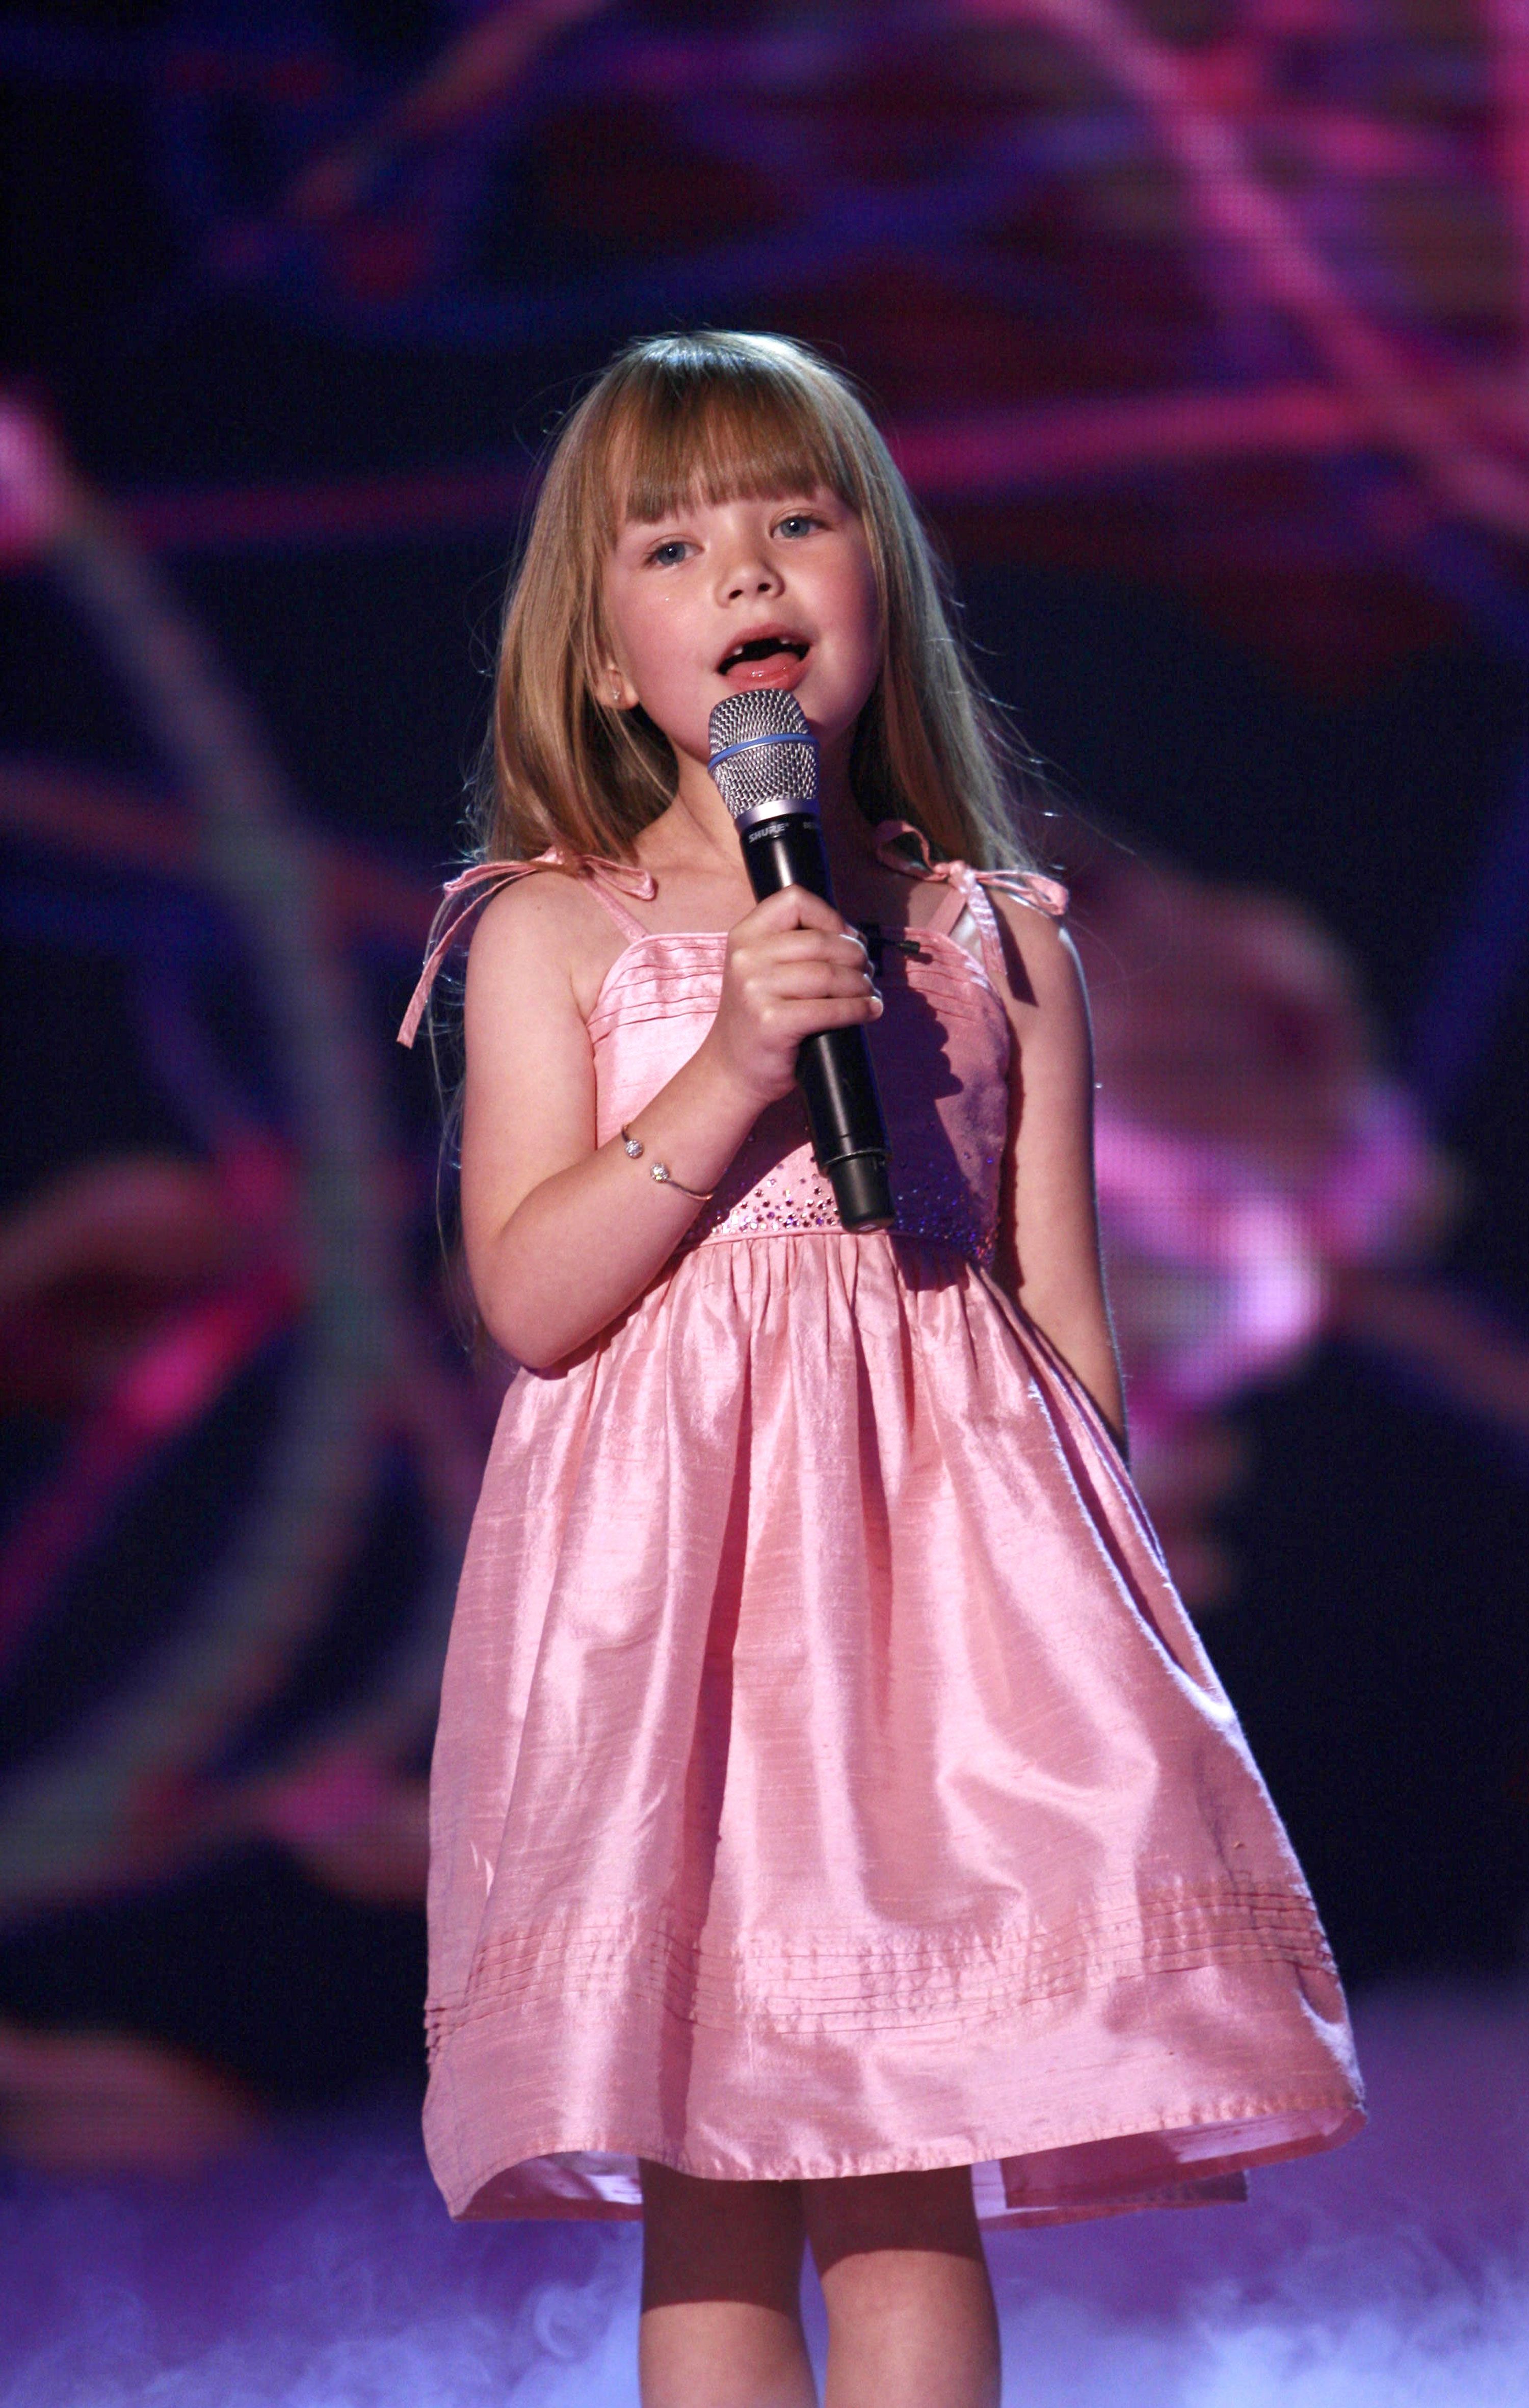 Connie Talbot - Best Of Young Talent